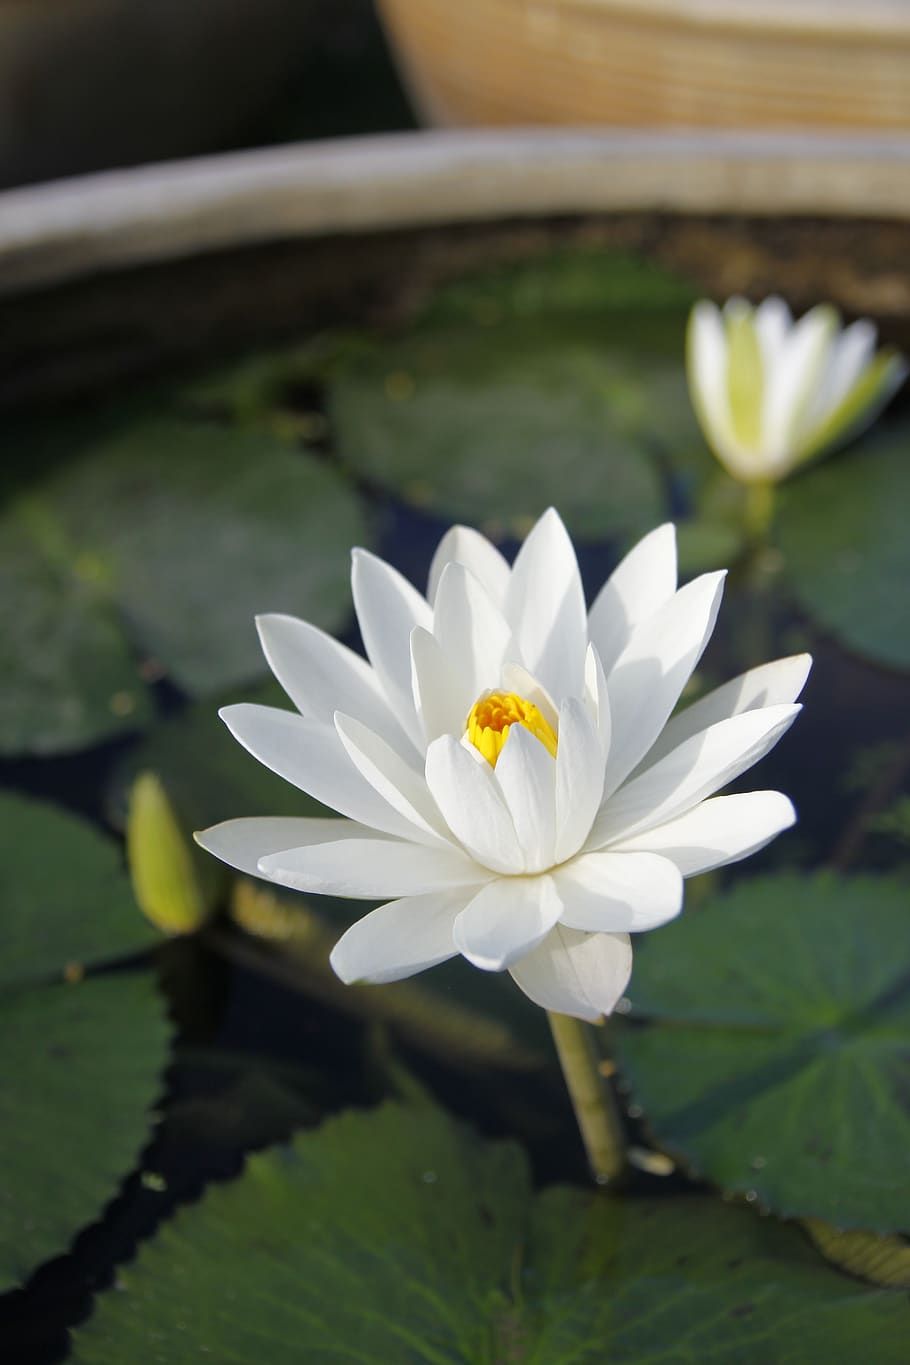 white water lily, sung, pond, bloom, flower, blossom, thailand, flowering plant, fragility, vulnerability